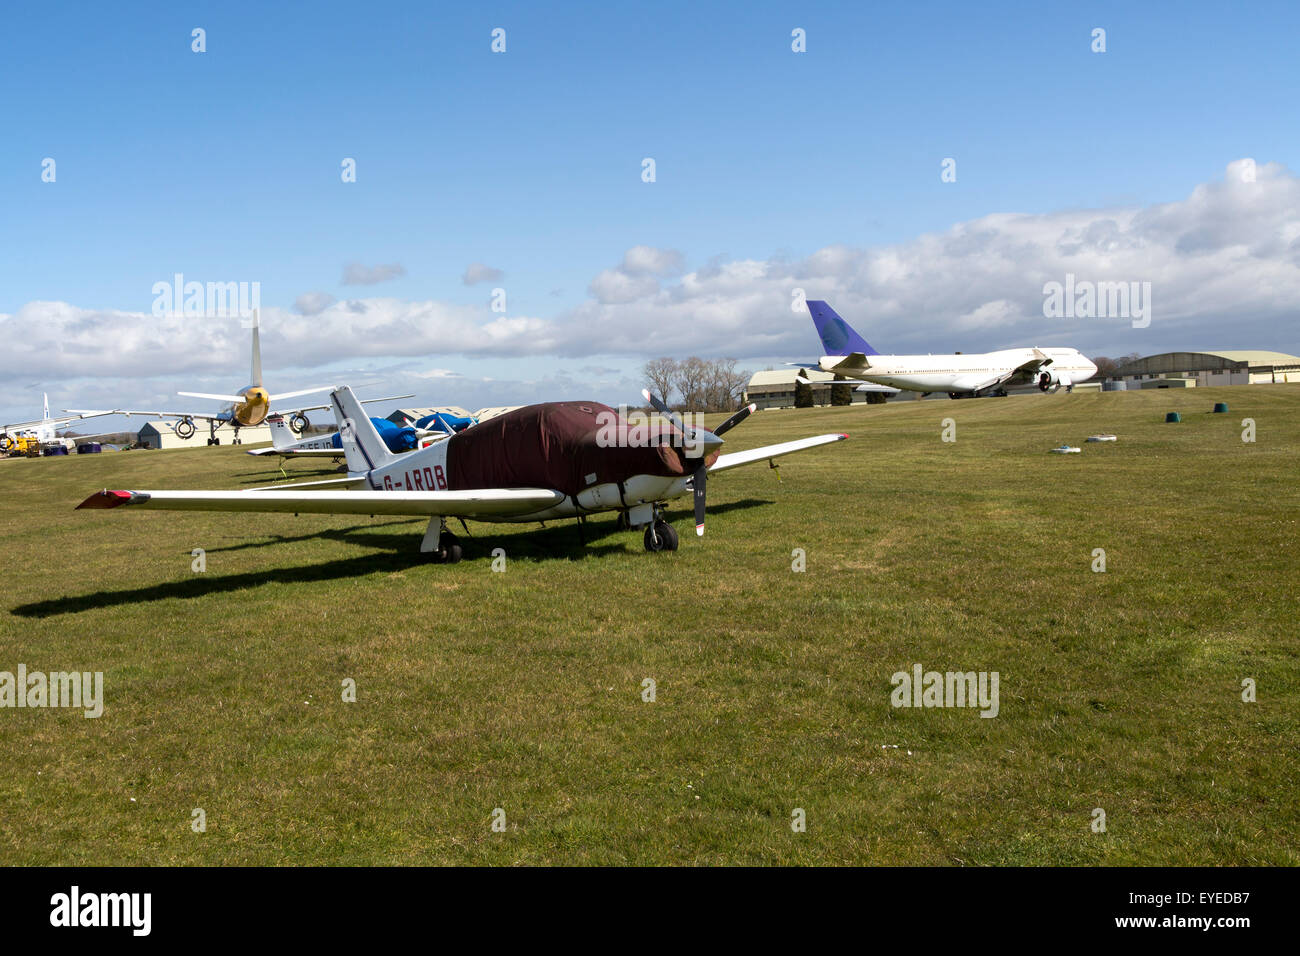 Cotswold Airport, Cirencester, Gloucestershire, England, UK Stock Photo